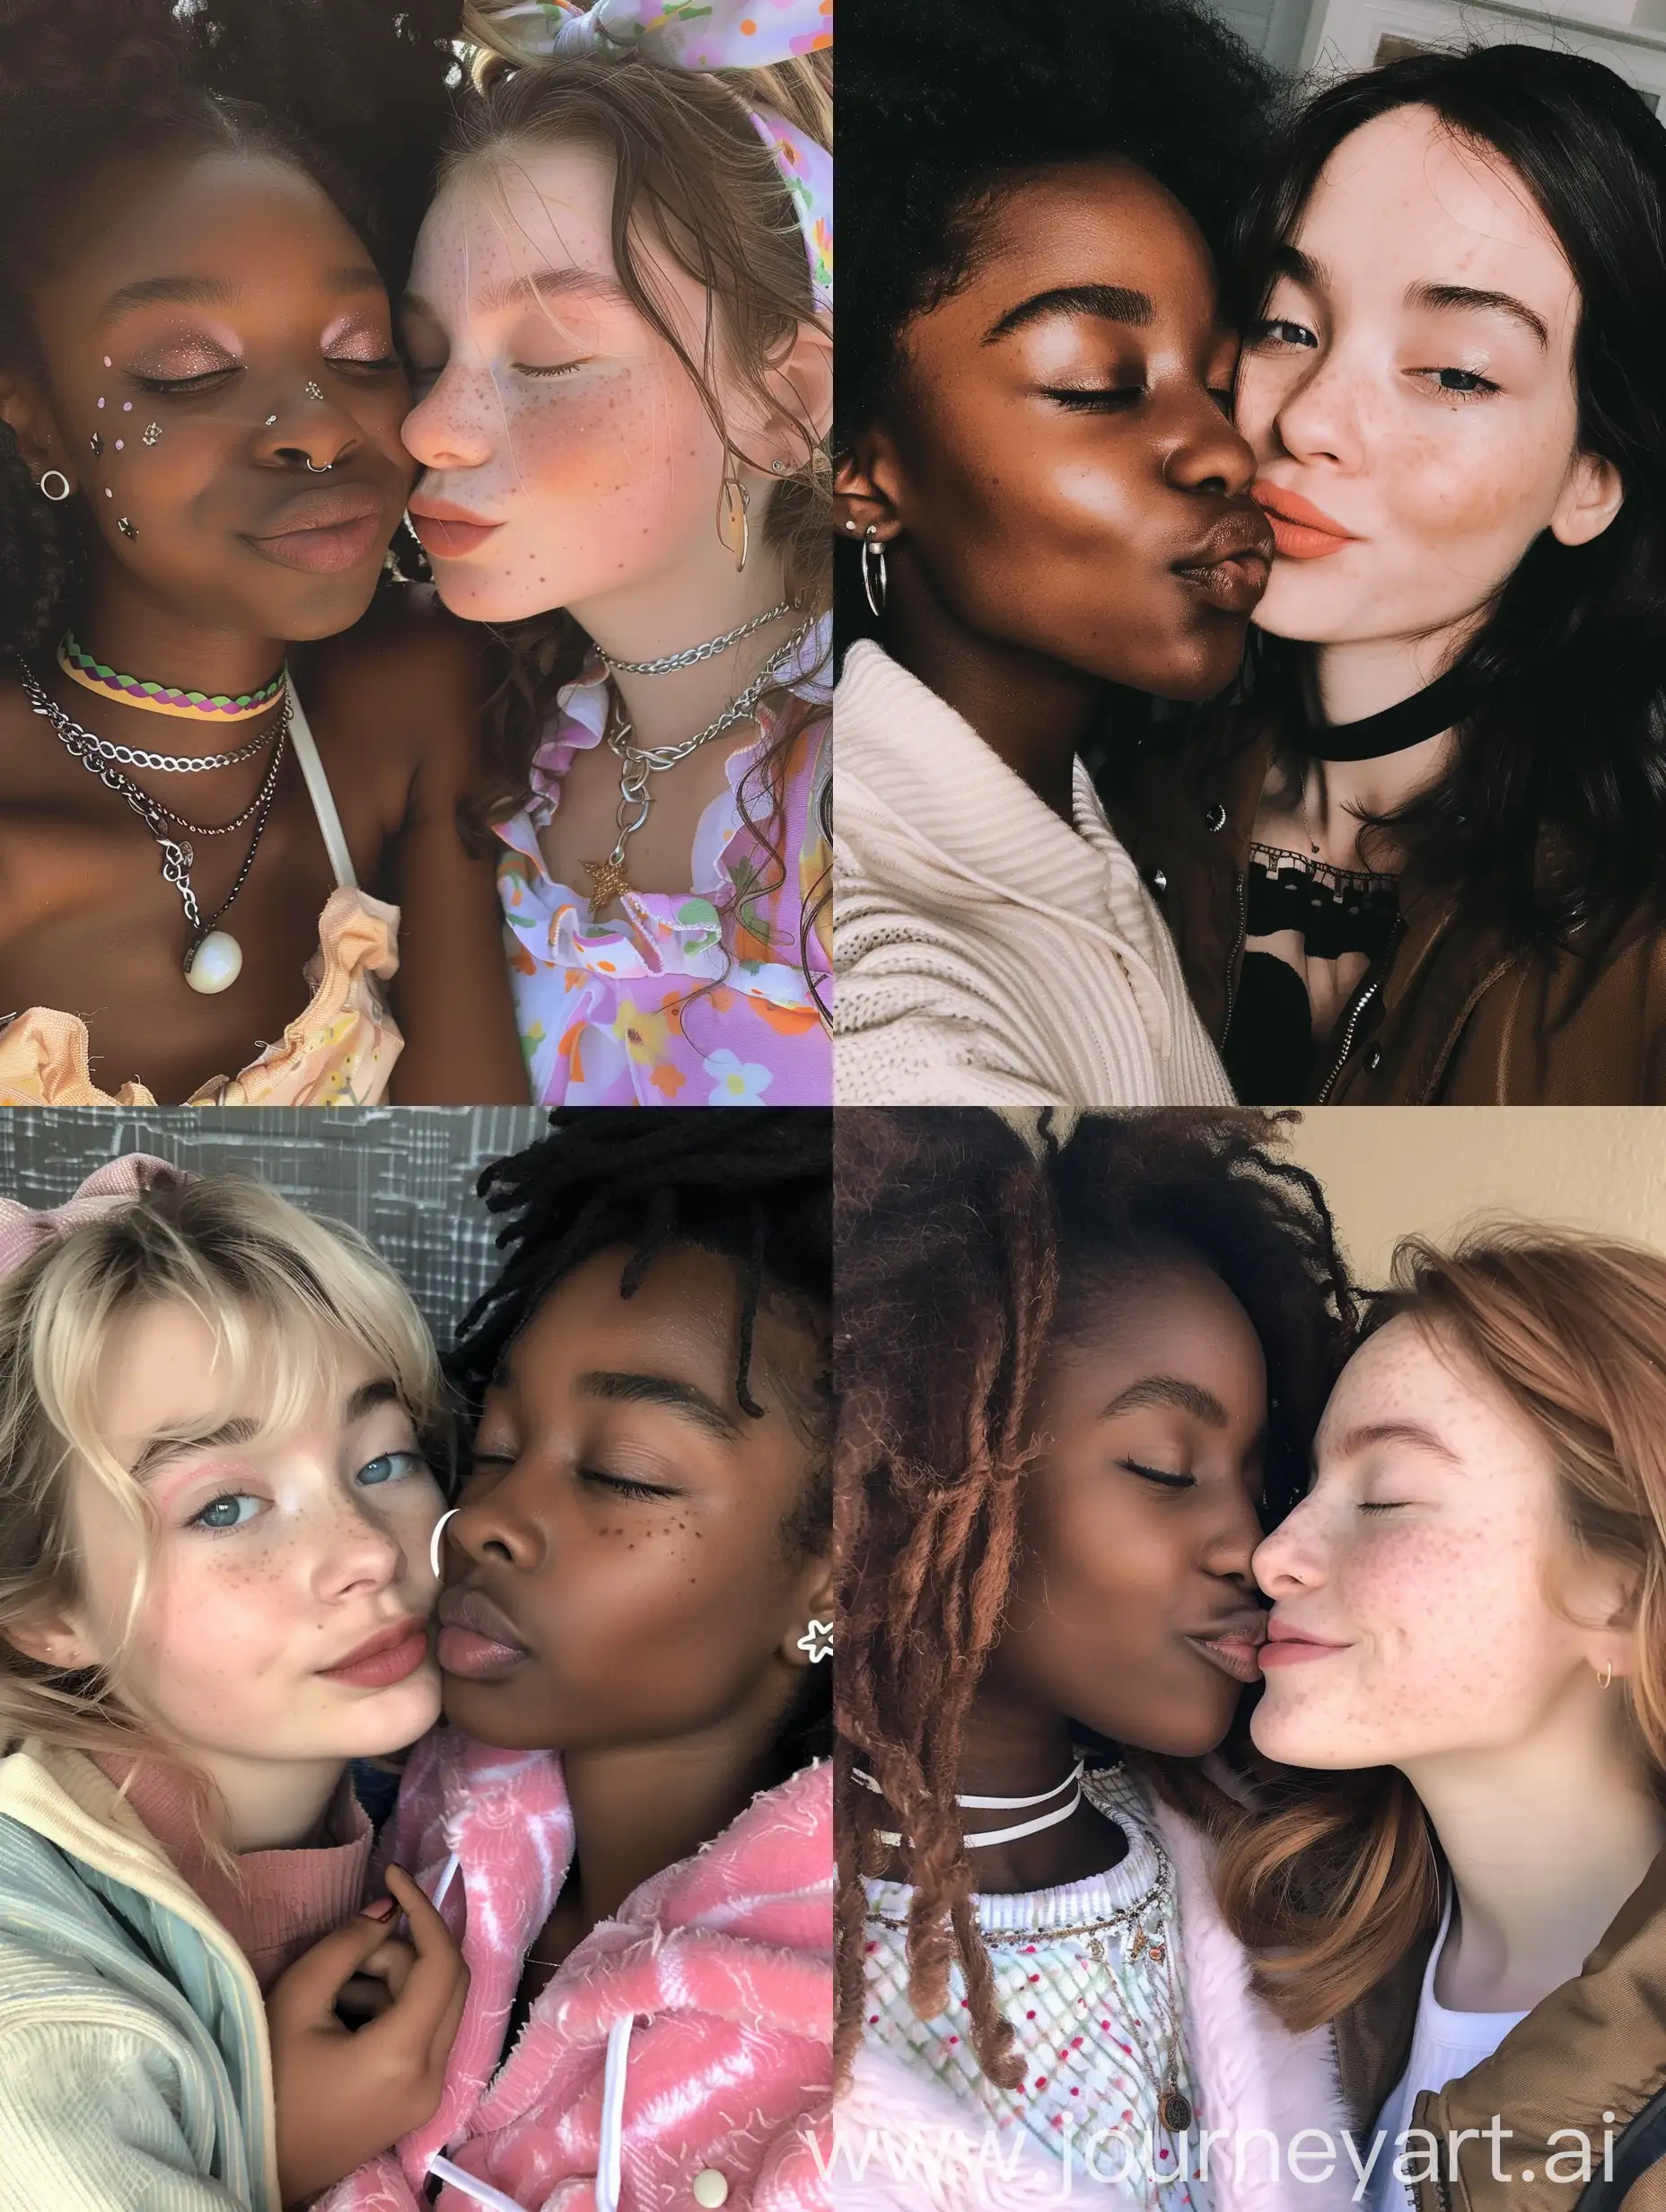 Aesthetic Instagram selfie of two girls, best friends, close up selfie, kissing cheek, adorable, trendy clothes, one black girl, one white girl 